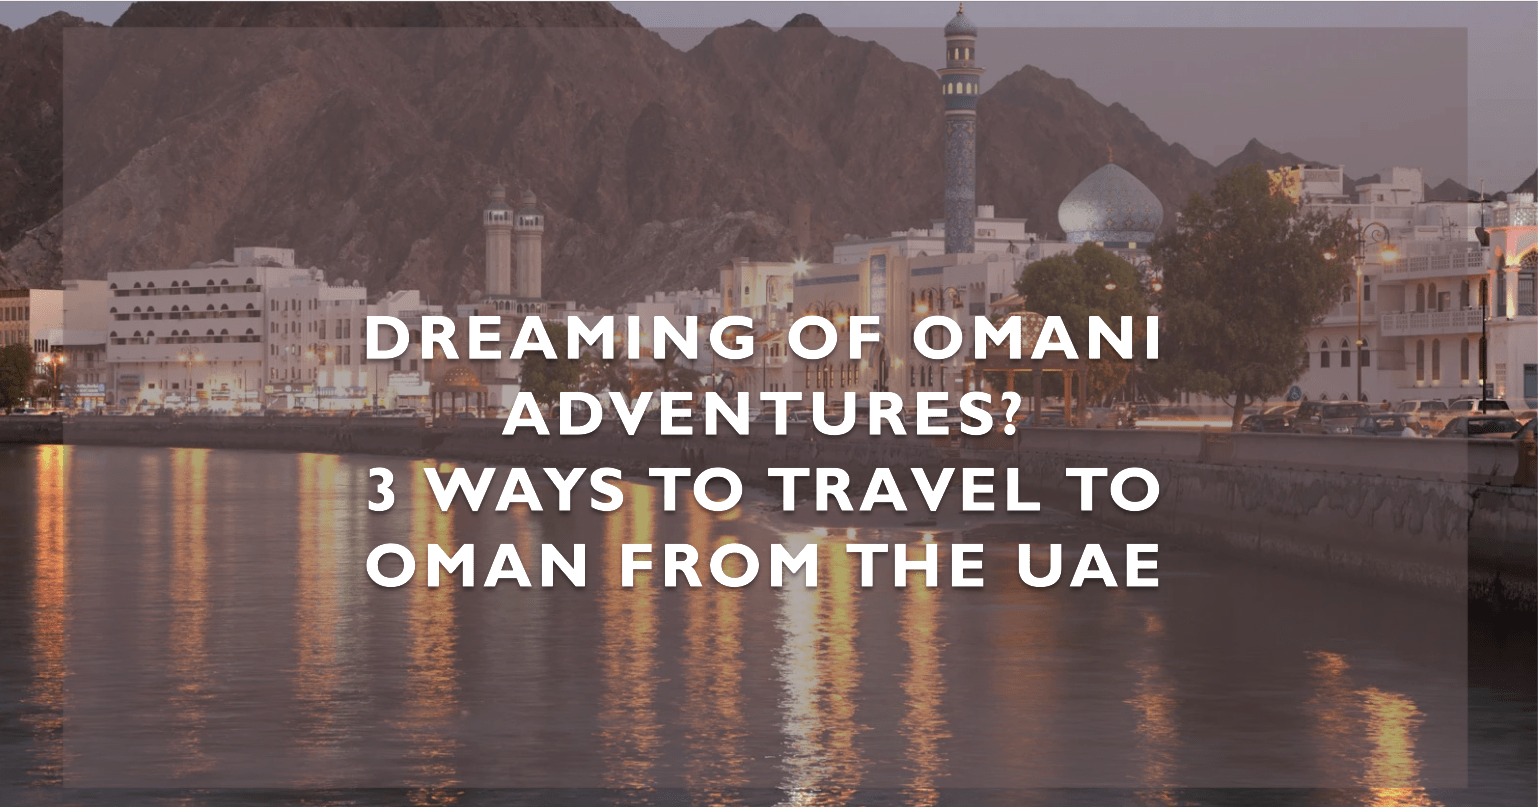 3 Ways to Travel to Oman from the UAE